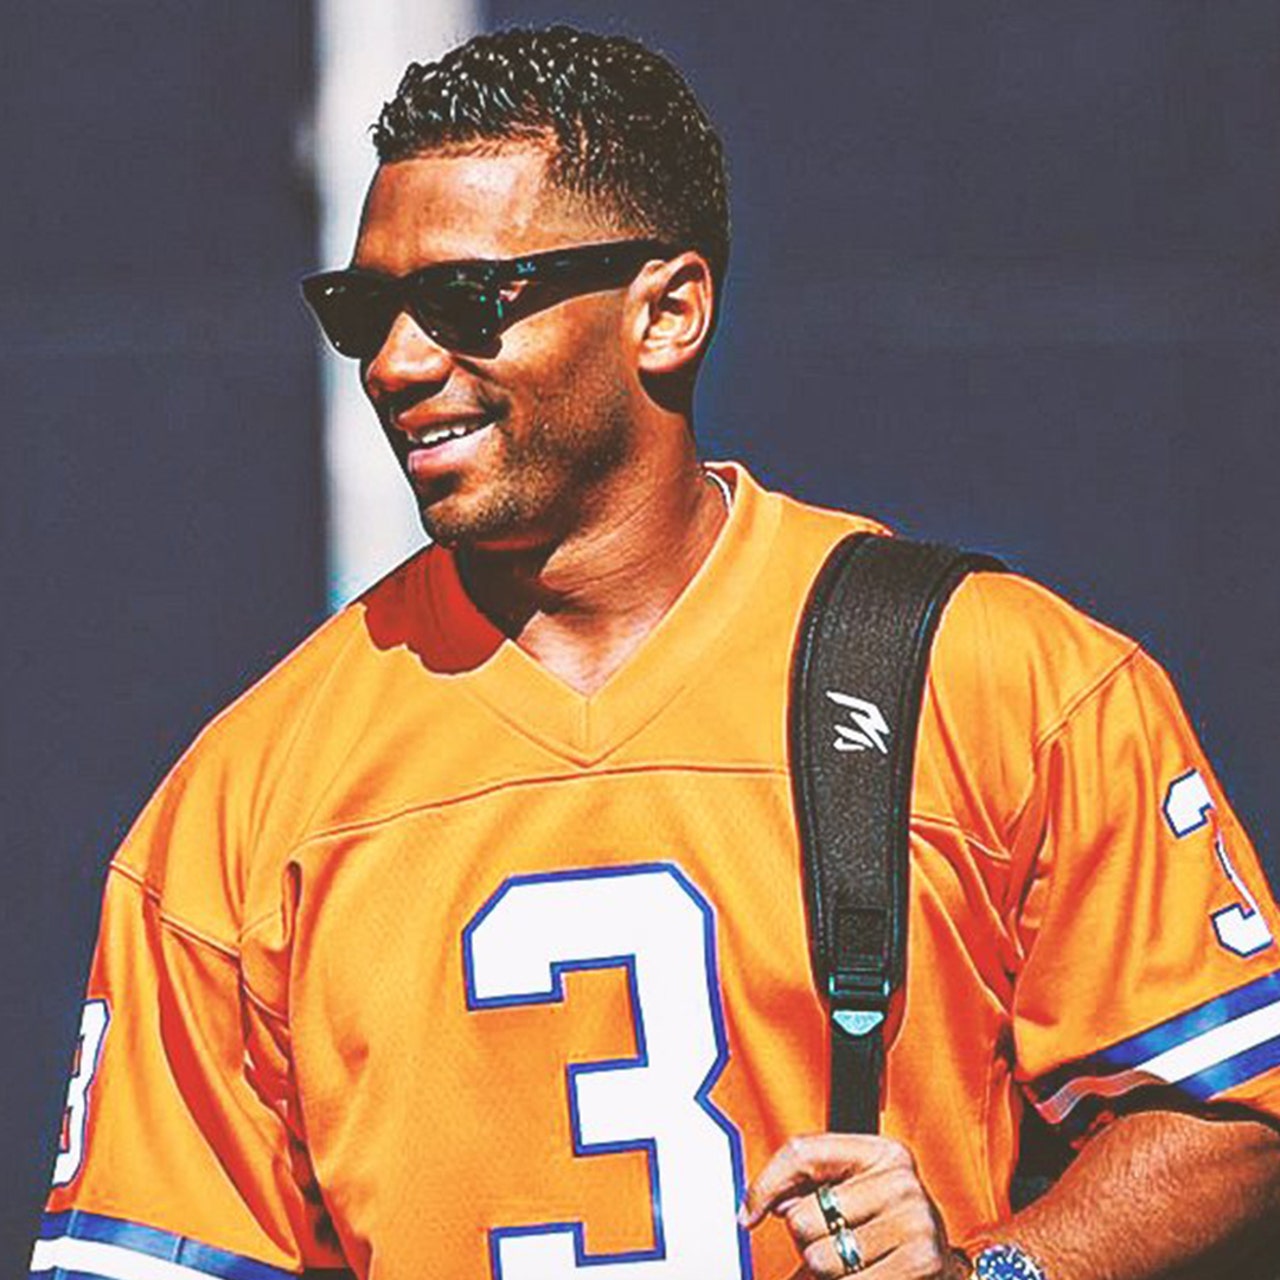 Russell Wilson boldly wears own jersey to camp